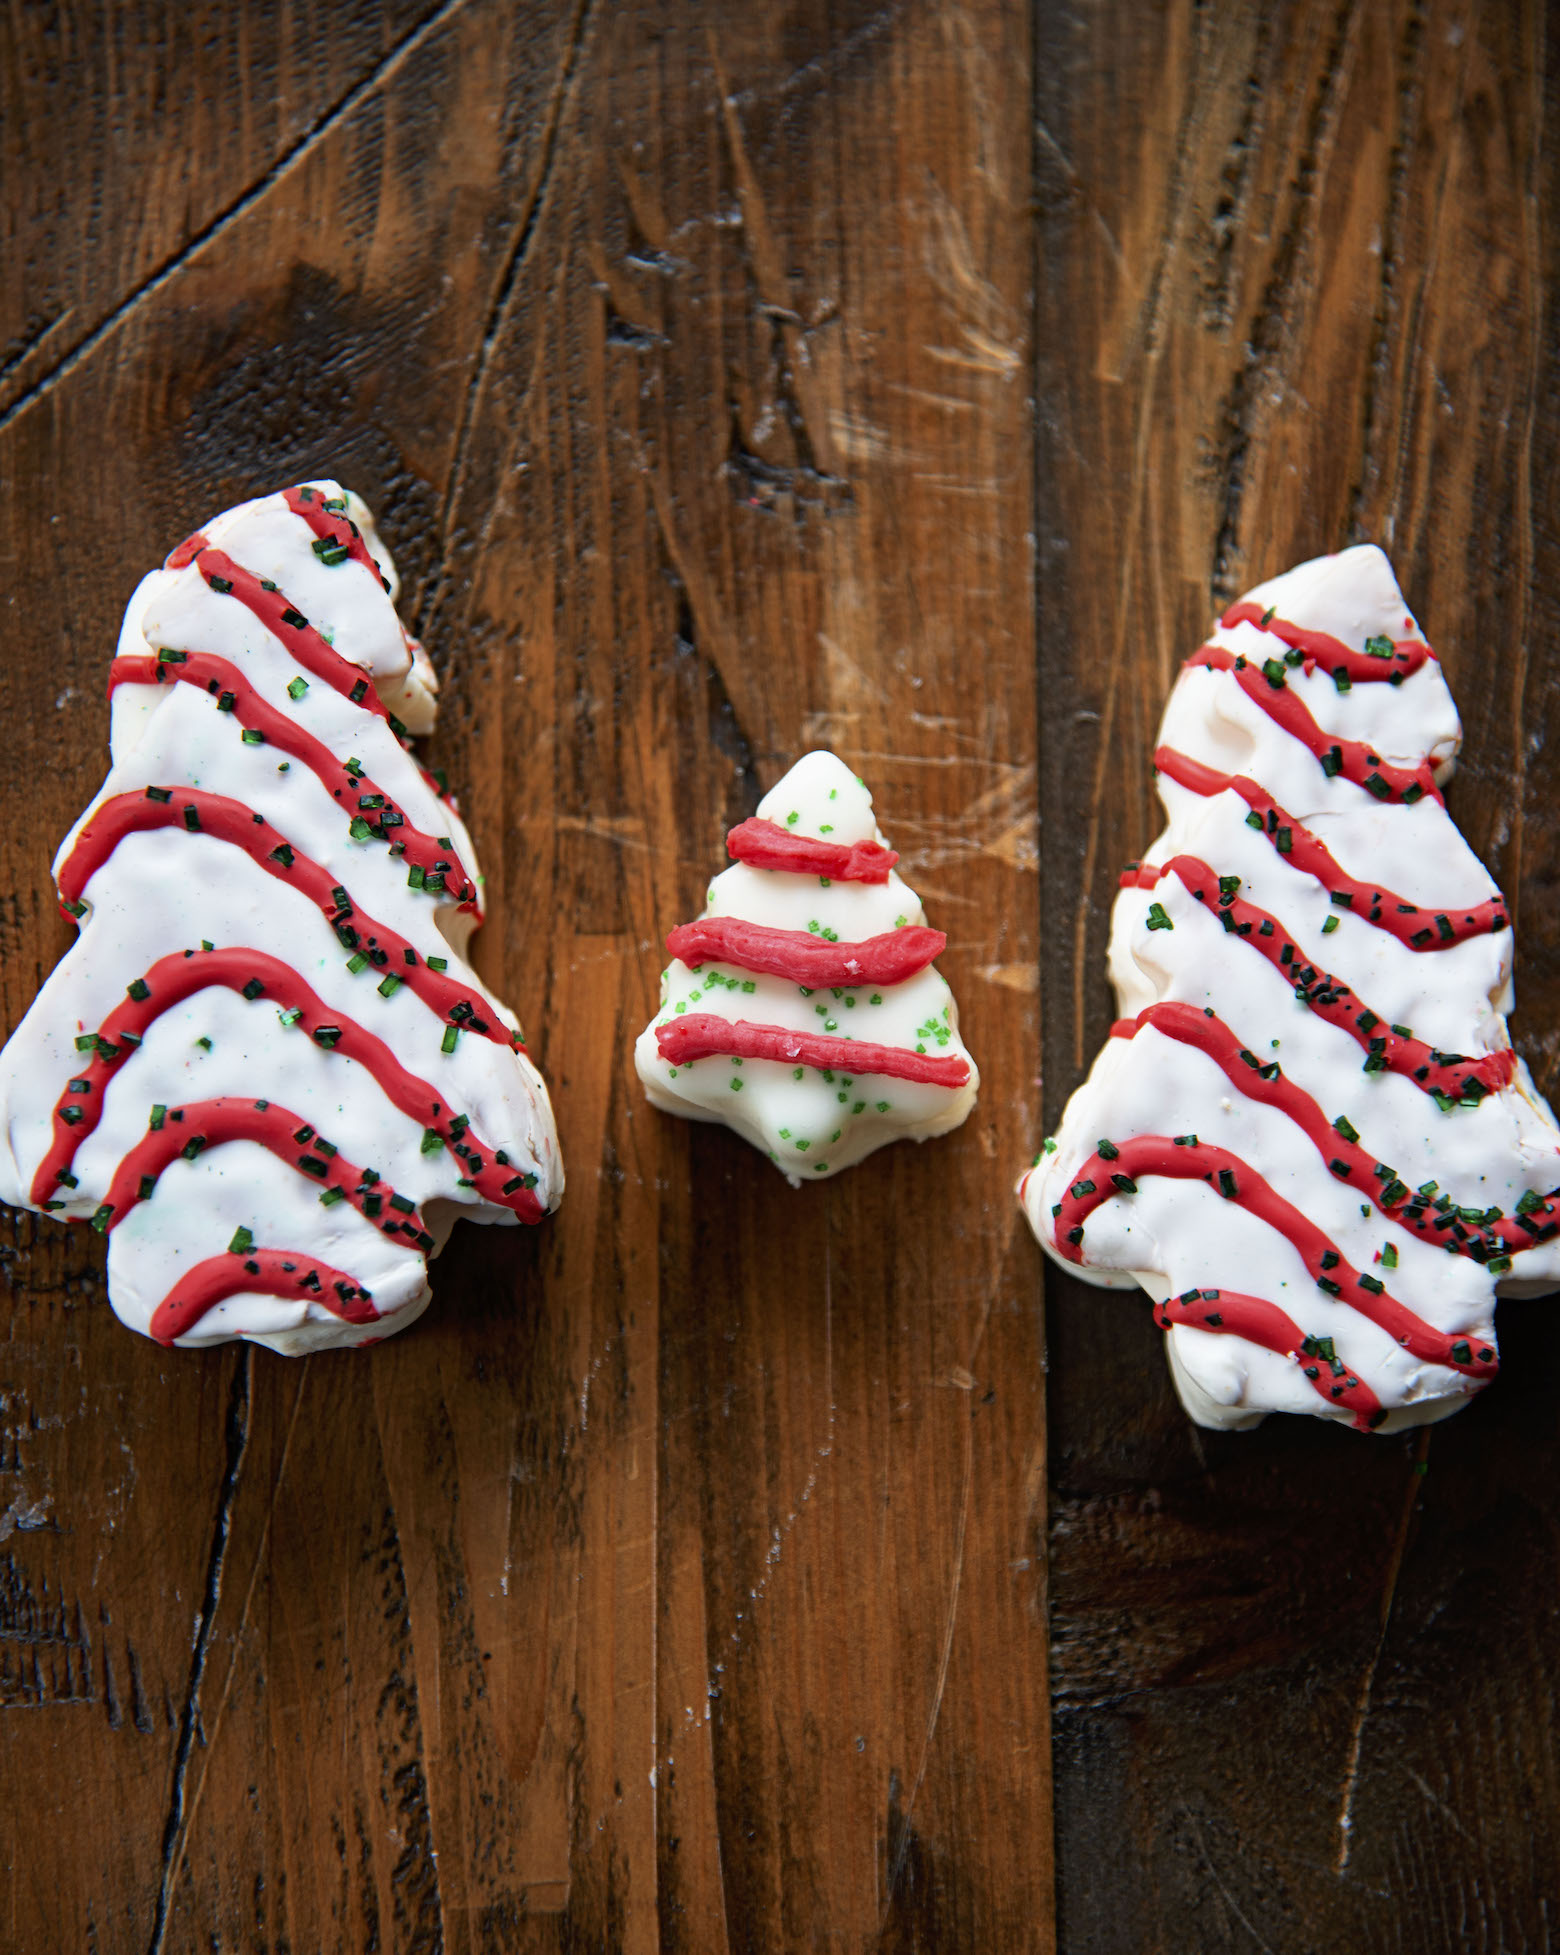 A piece of Christmas Tree Cake Fudge between two Little Debbie Christmas Tree Cakes